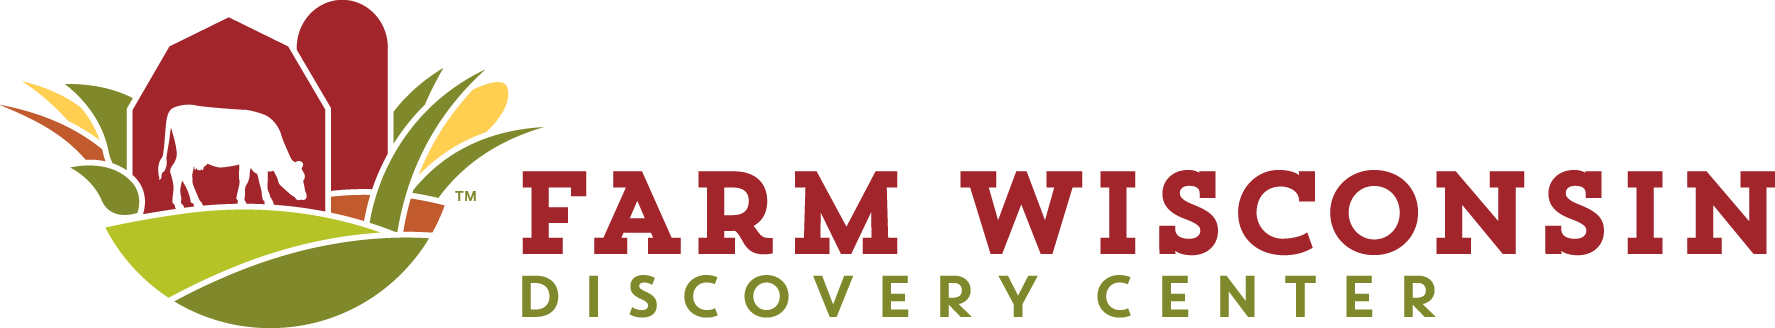 Farm Wisconsin Discovery Center | Wisconsin's Agricultural Education Center